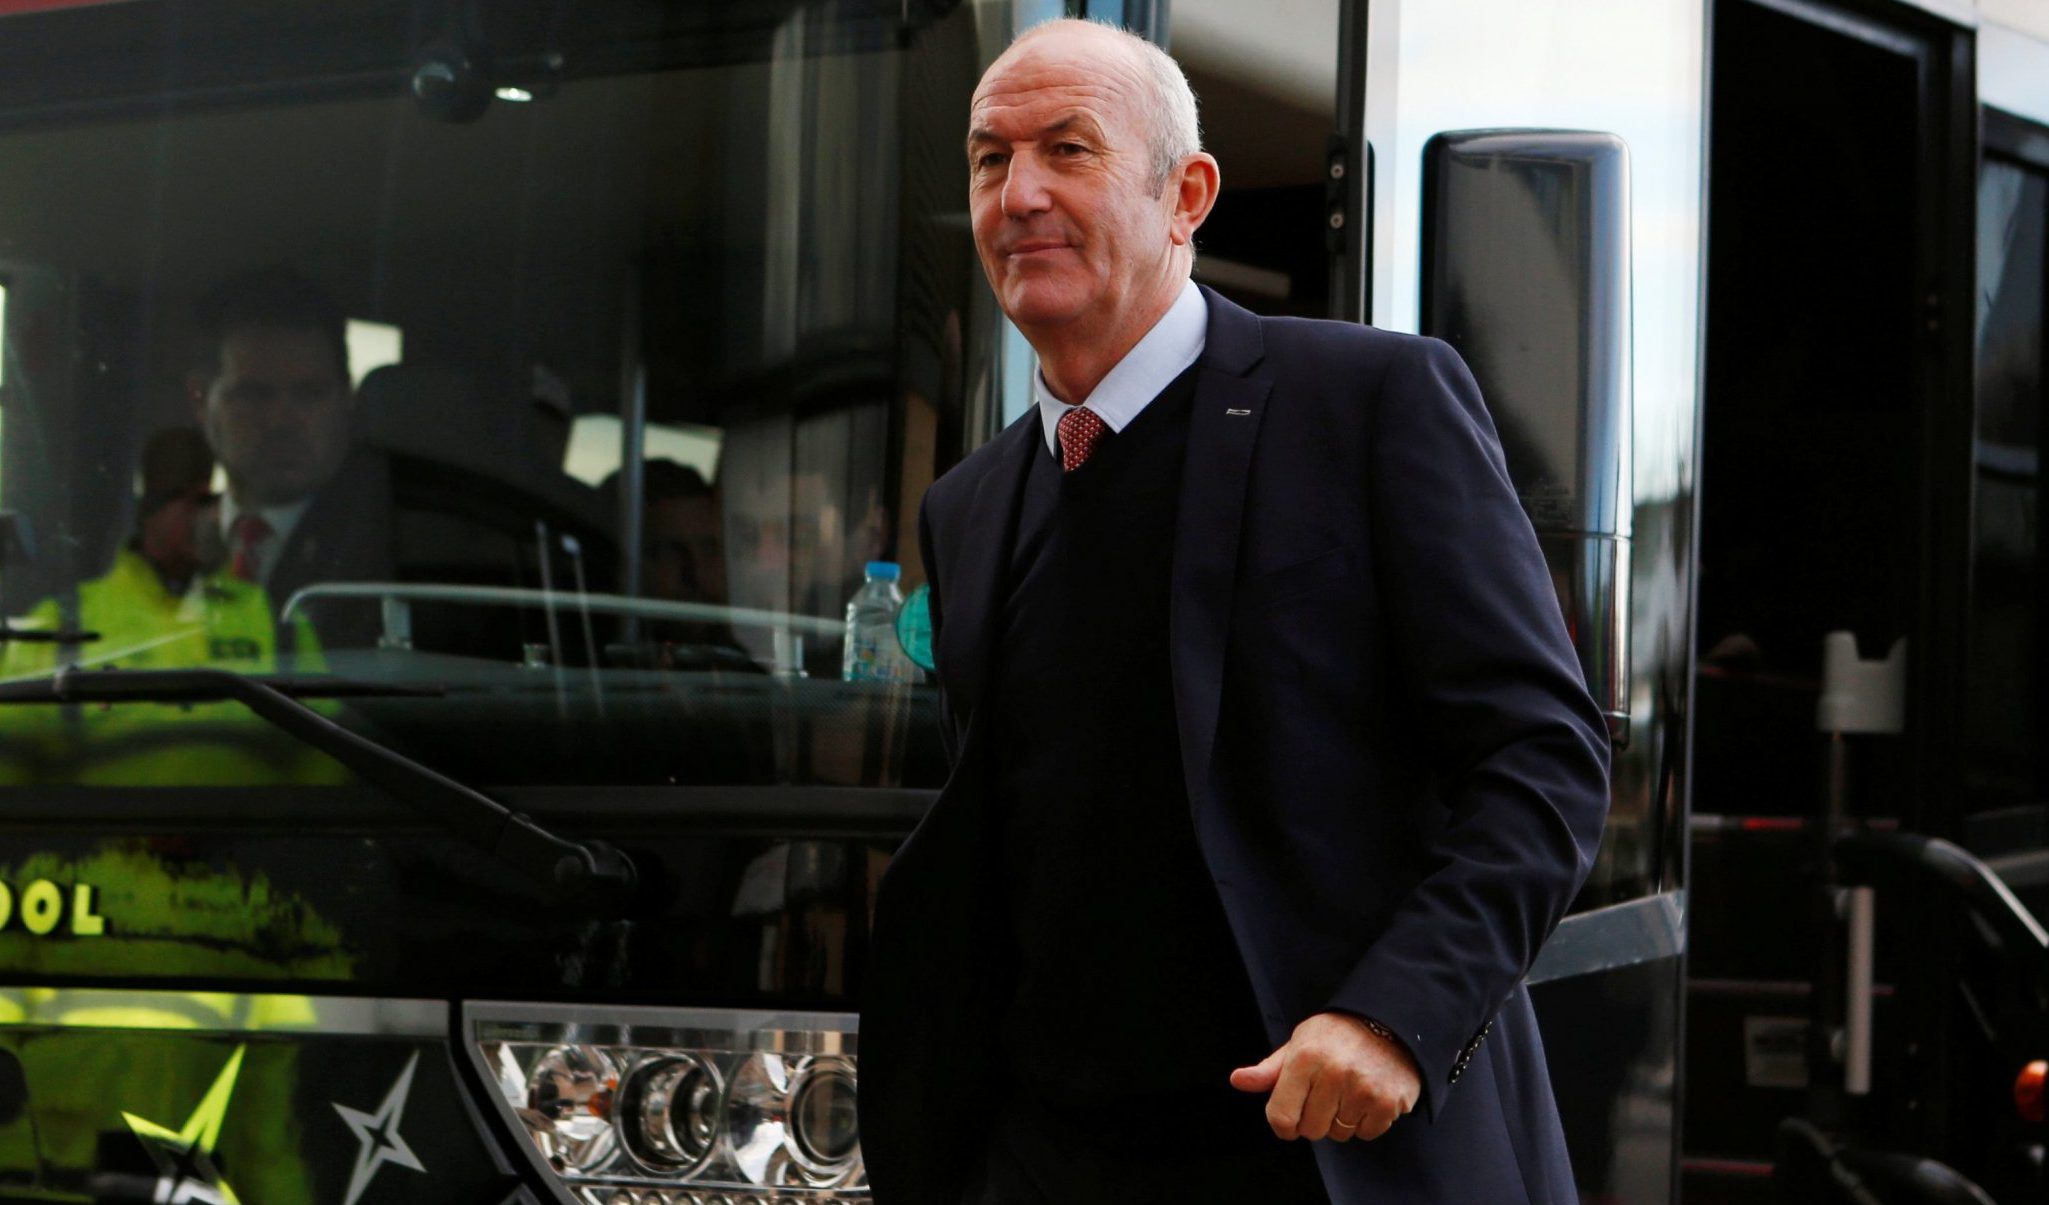 Middlesbrough manager Tony Pulis arrives at stadium before clash with Derby County